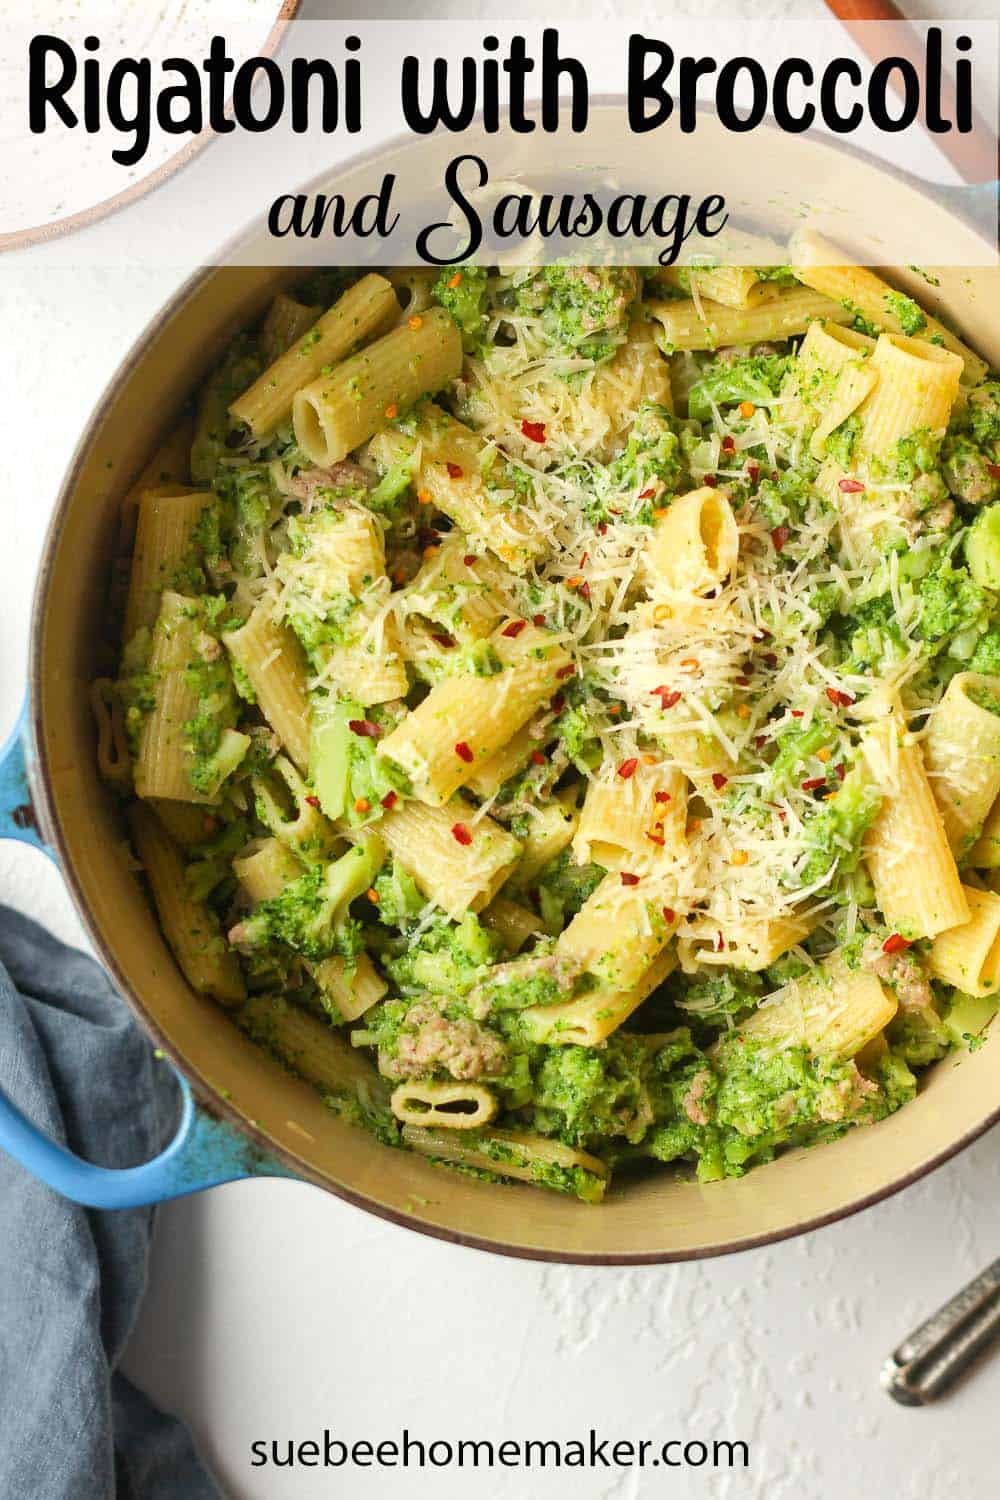 A pot of the rigatoni pasta with broccoli and sausage.